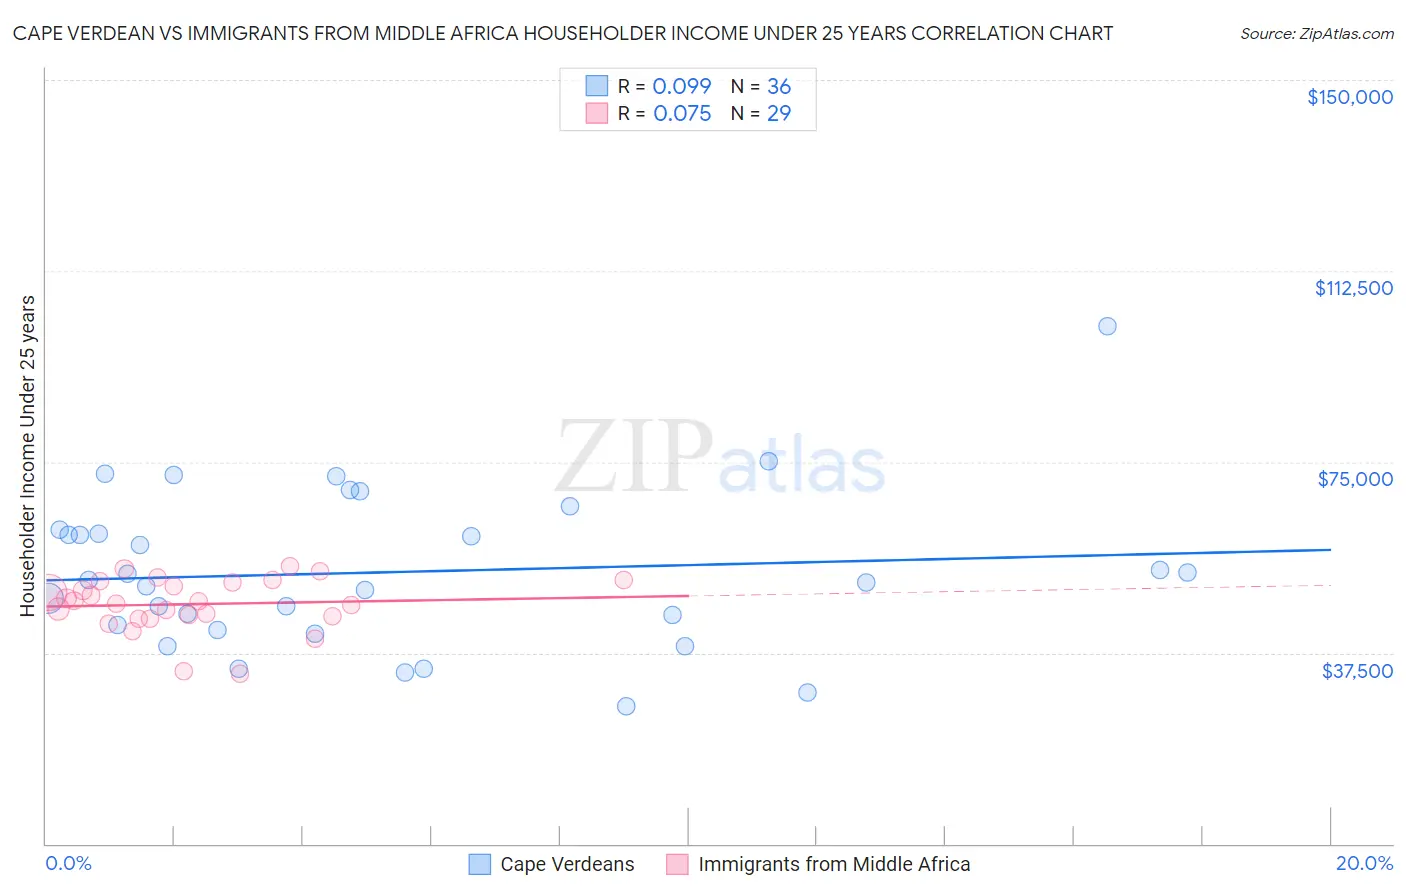 Cape Verdean vs Immigrants from Middle Africa Householder Income Under 25 years